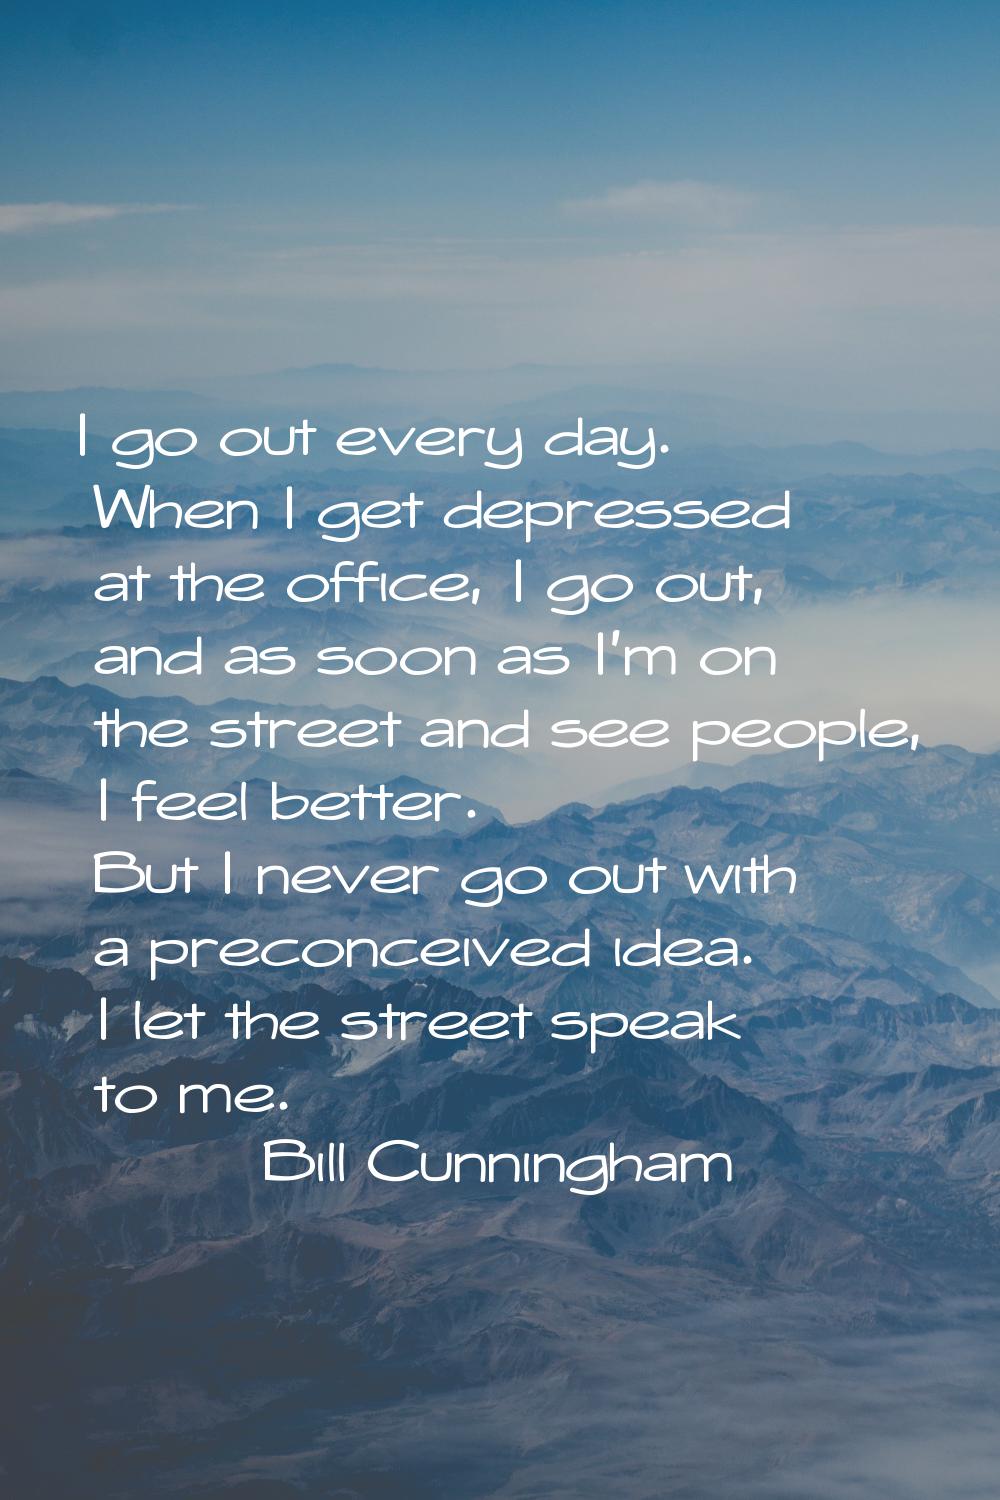 I go out every day. When I get depressed at the office, I go out, and as soon as I'm on the street 